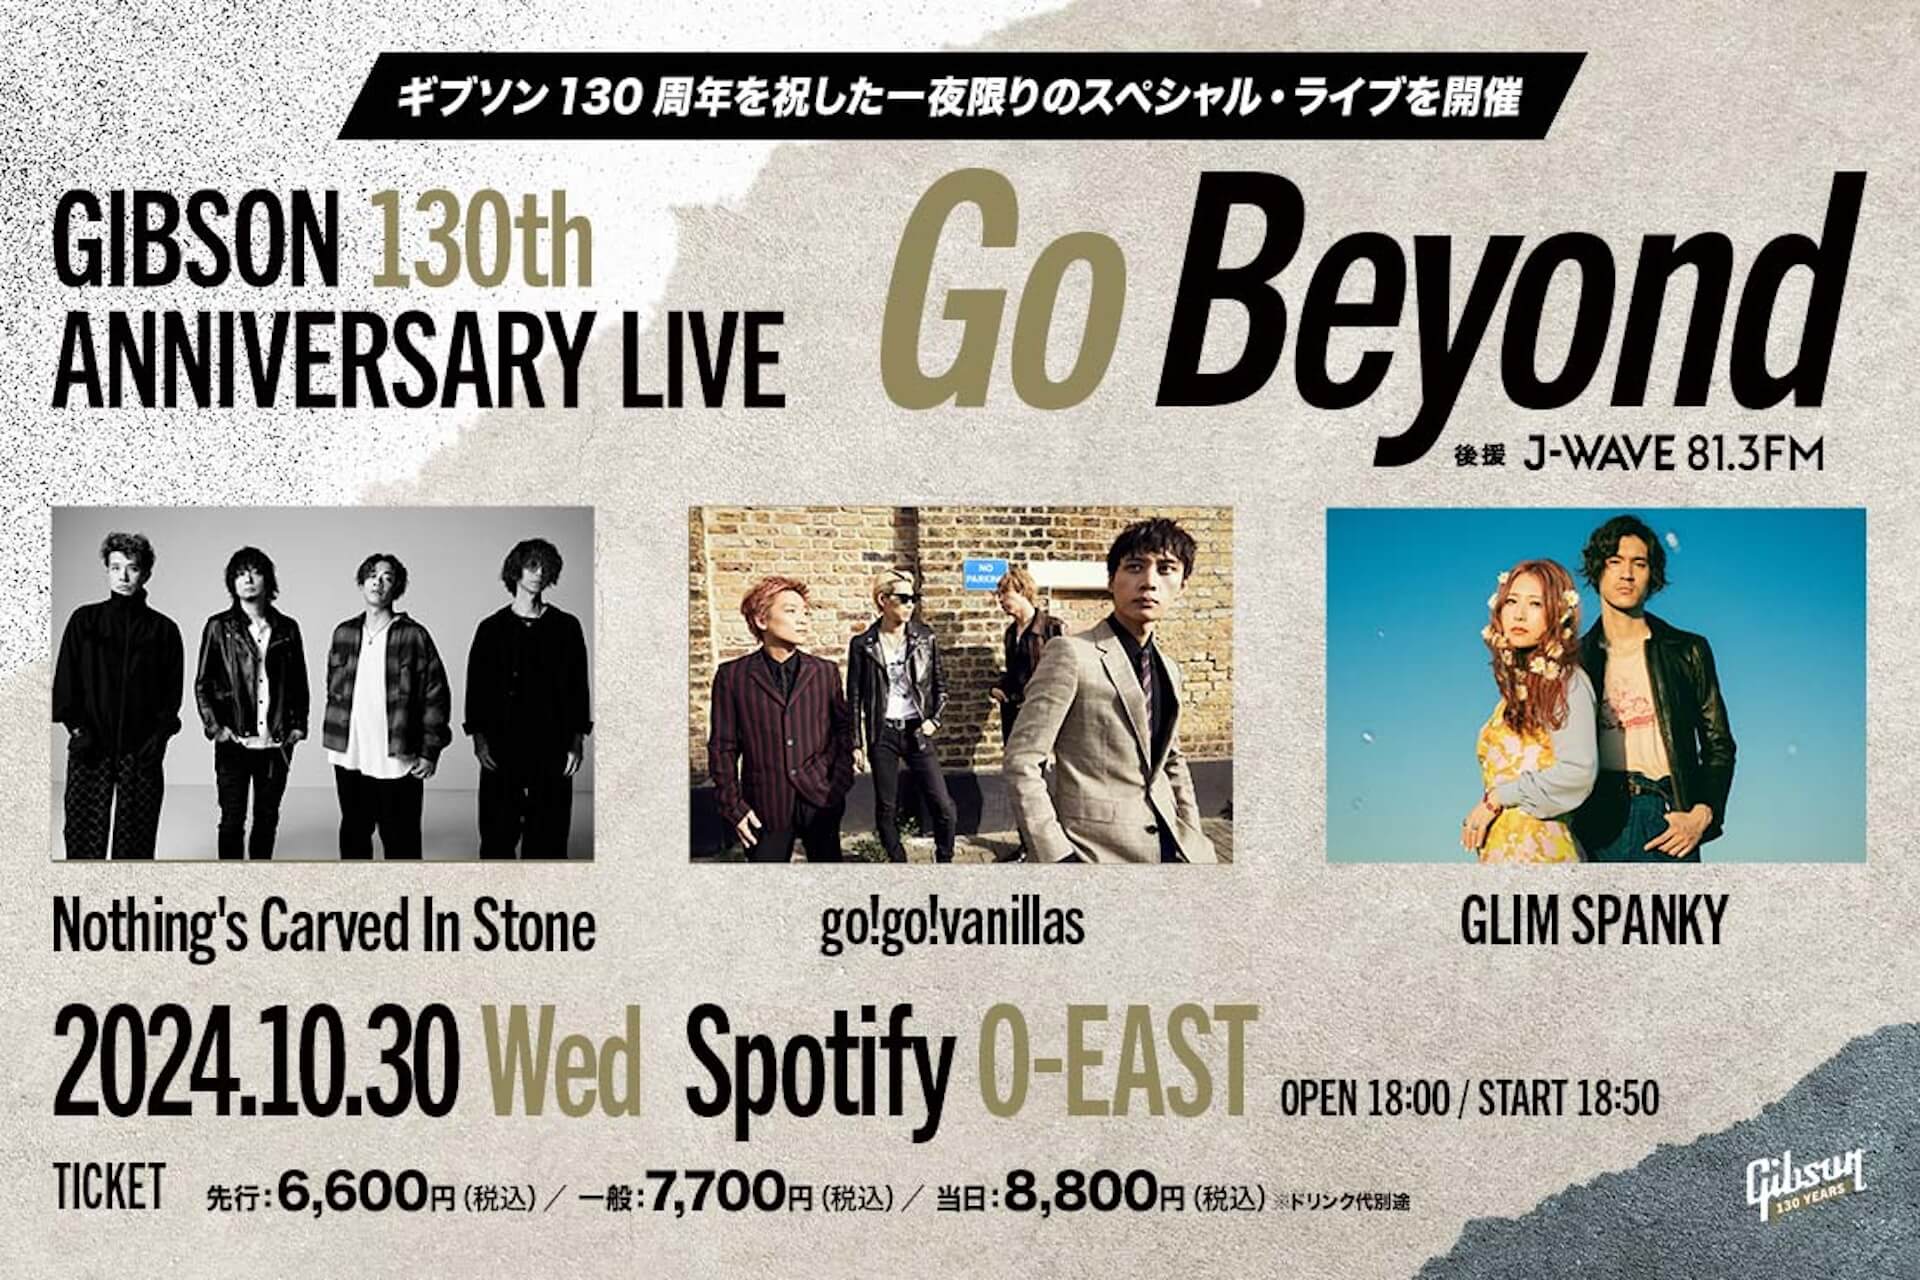 Nothing's Carved In Stone、go!go!vanillas、GLIM SPANKYがGibsonの130周年を祝福｜＜Gibson 130th Anniversary Live "Go Beyond"＞Spotify O-EASTで開催 music240802-gibson-130th4